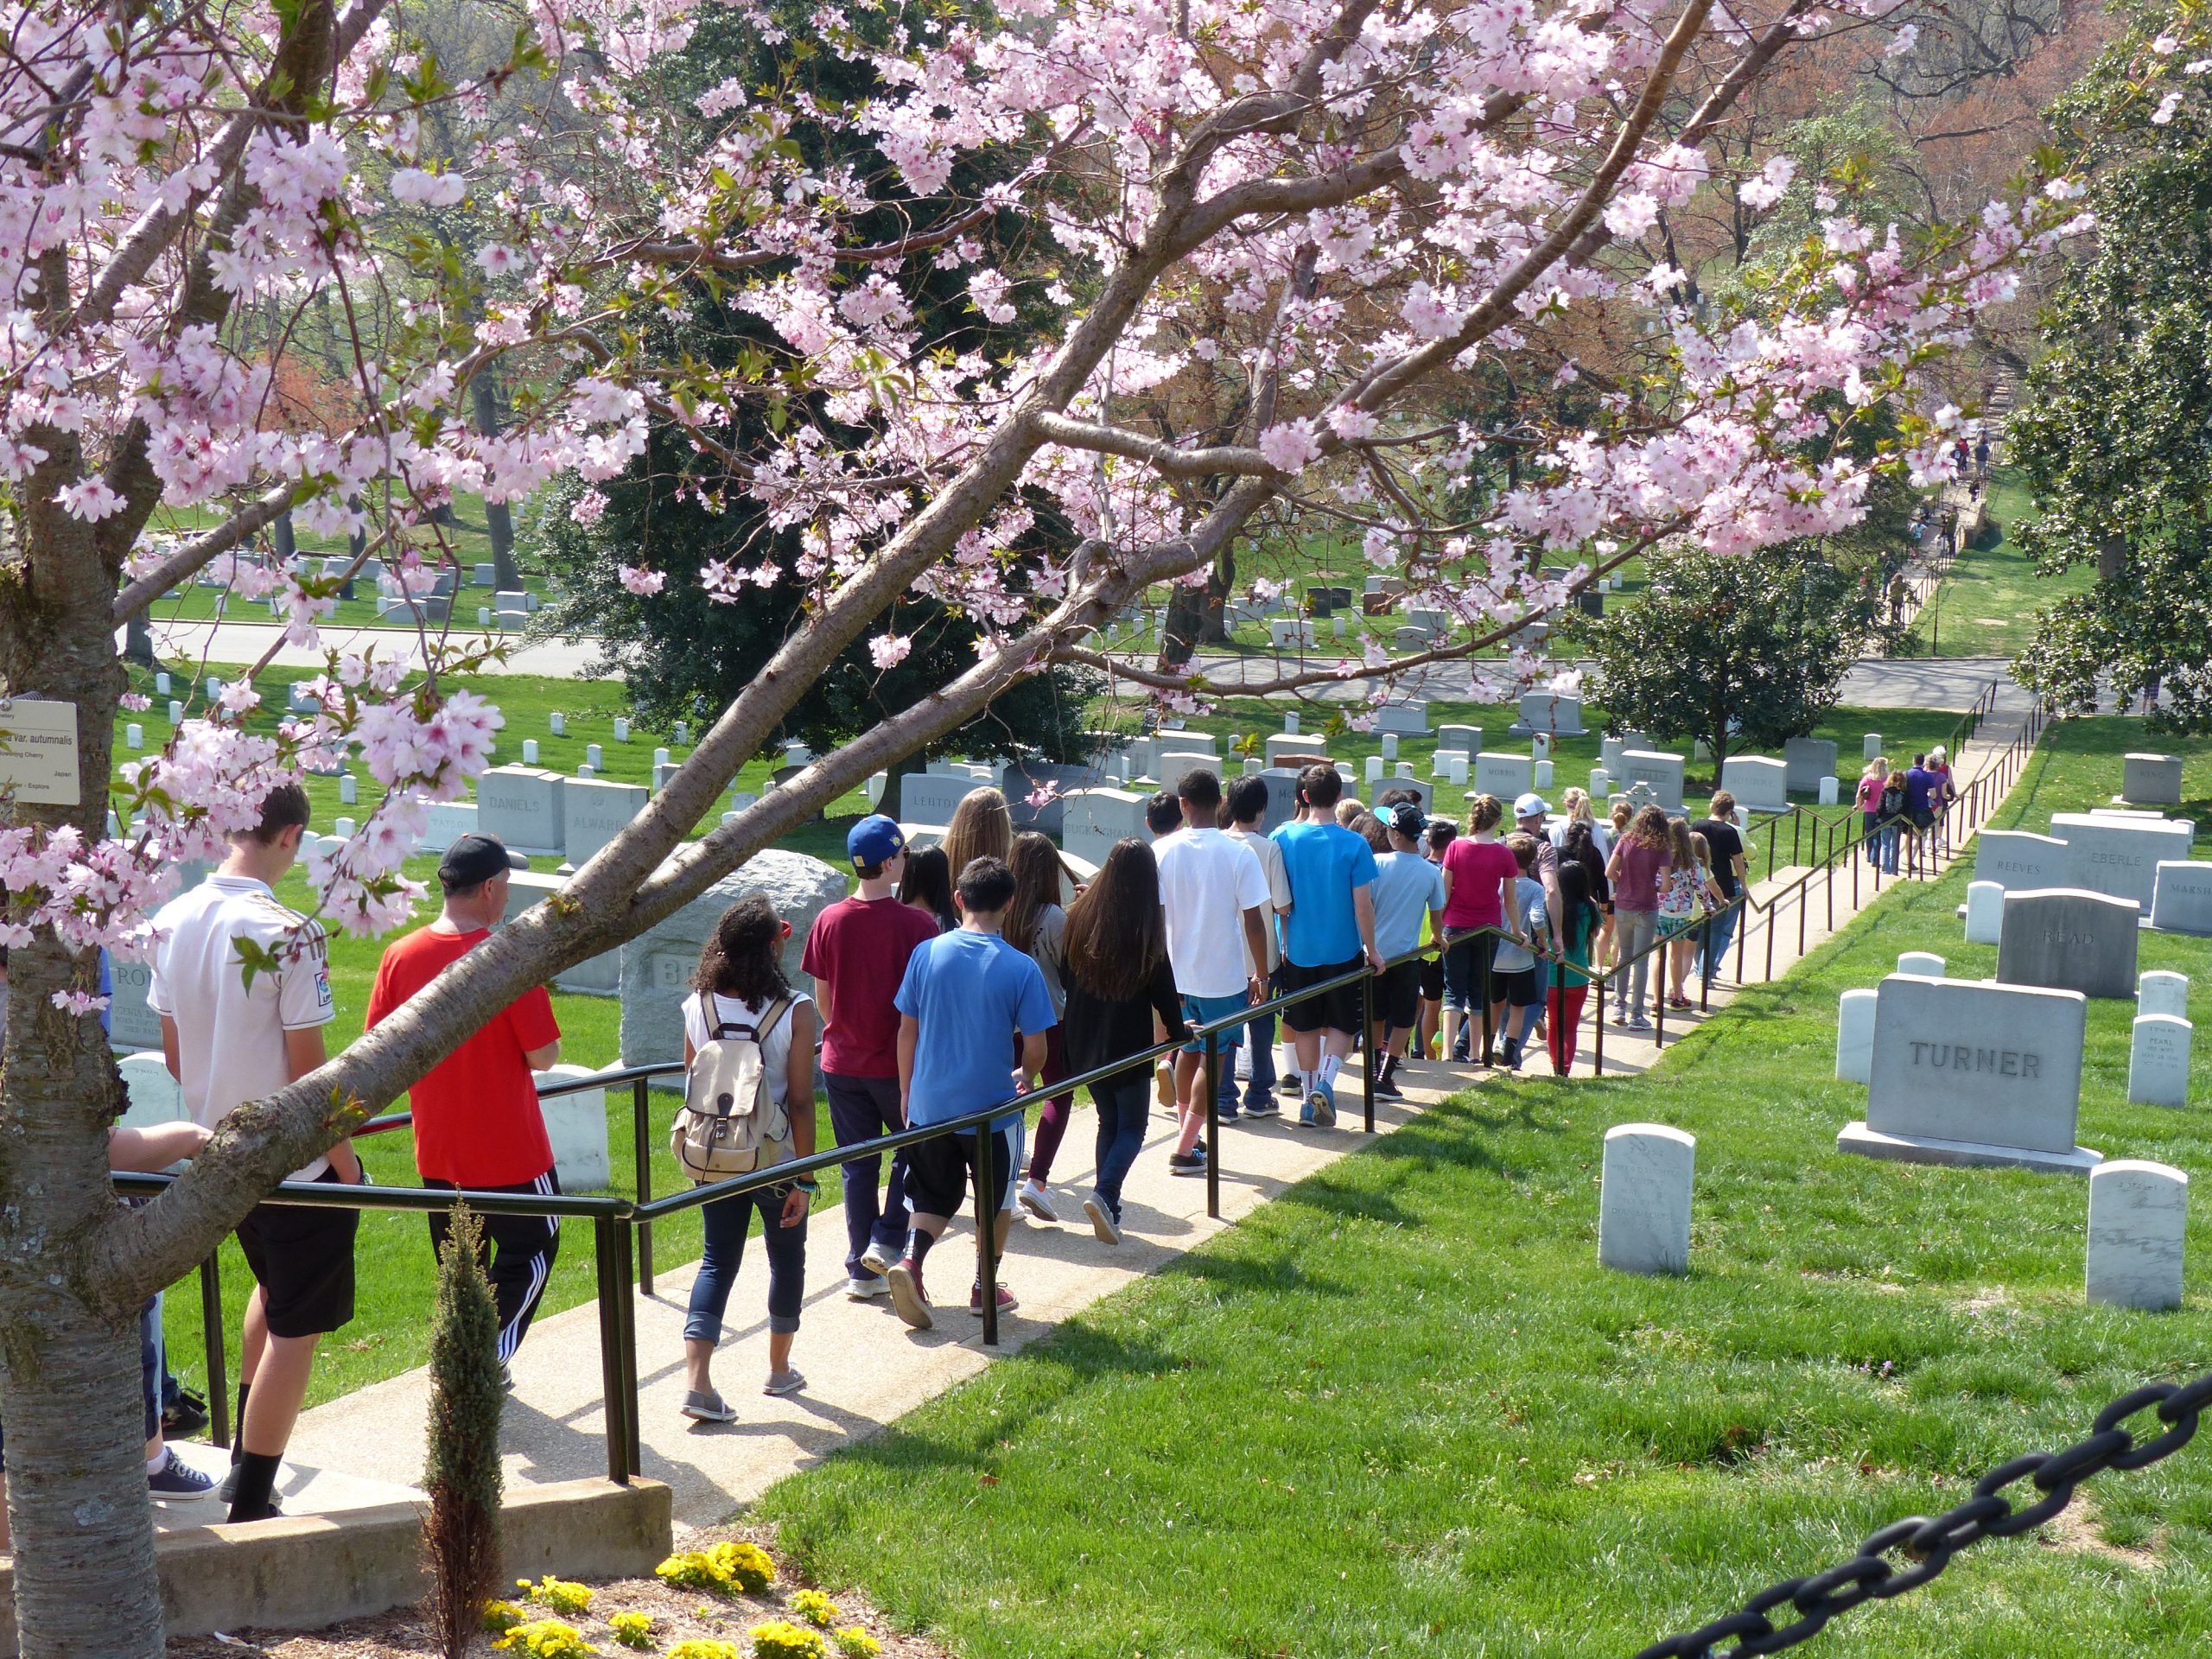 Group of students on an educational tour walking through the Arlington ware memorial park